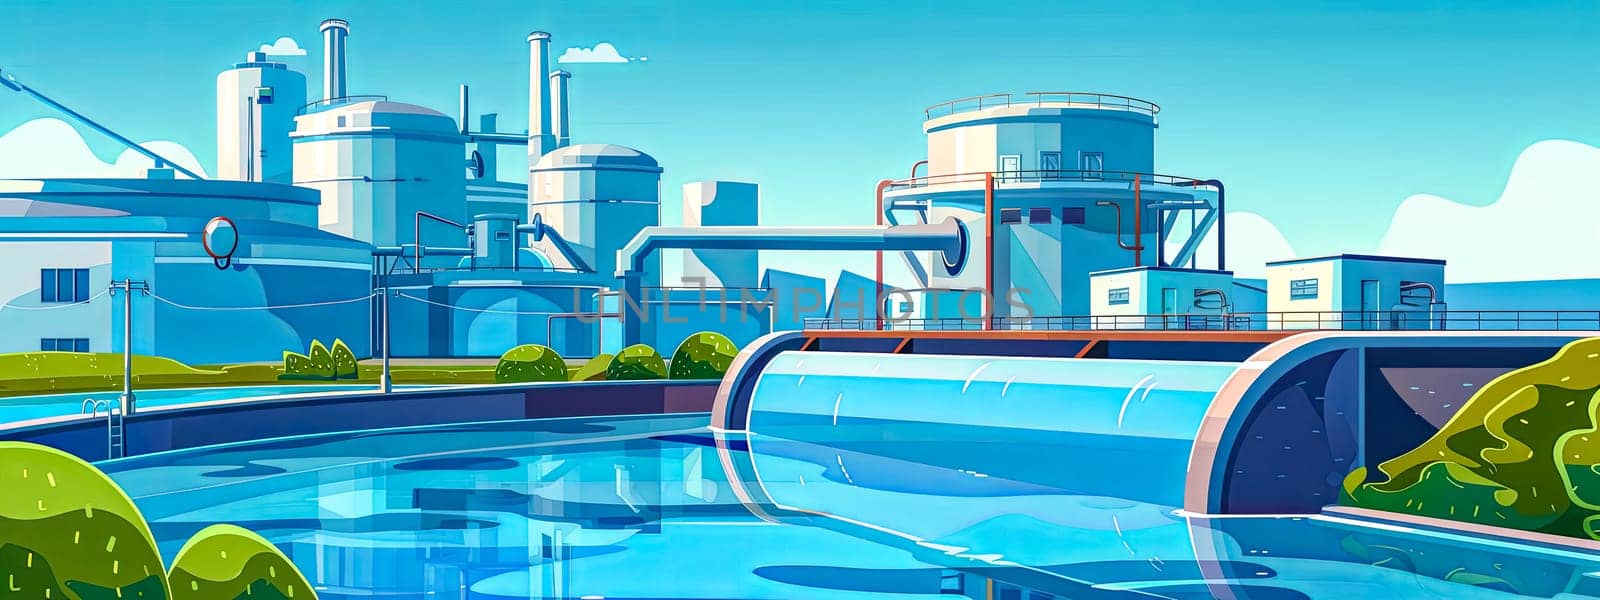 A cartoon illustration of a factory by the water, contrasting industrial building with natural landscape. Adjacent to a swimming pool, city skyline in the background